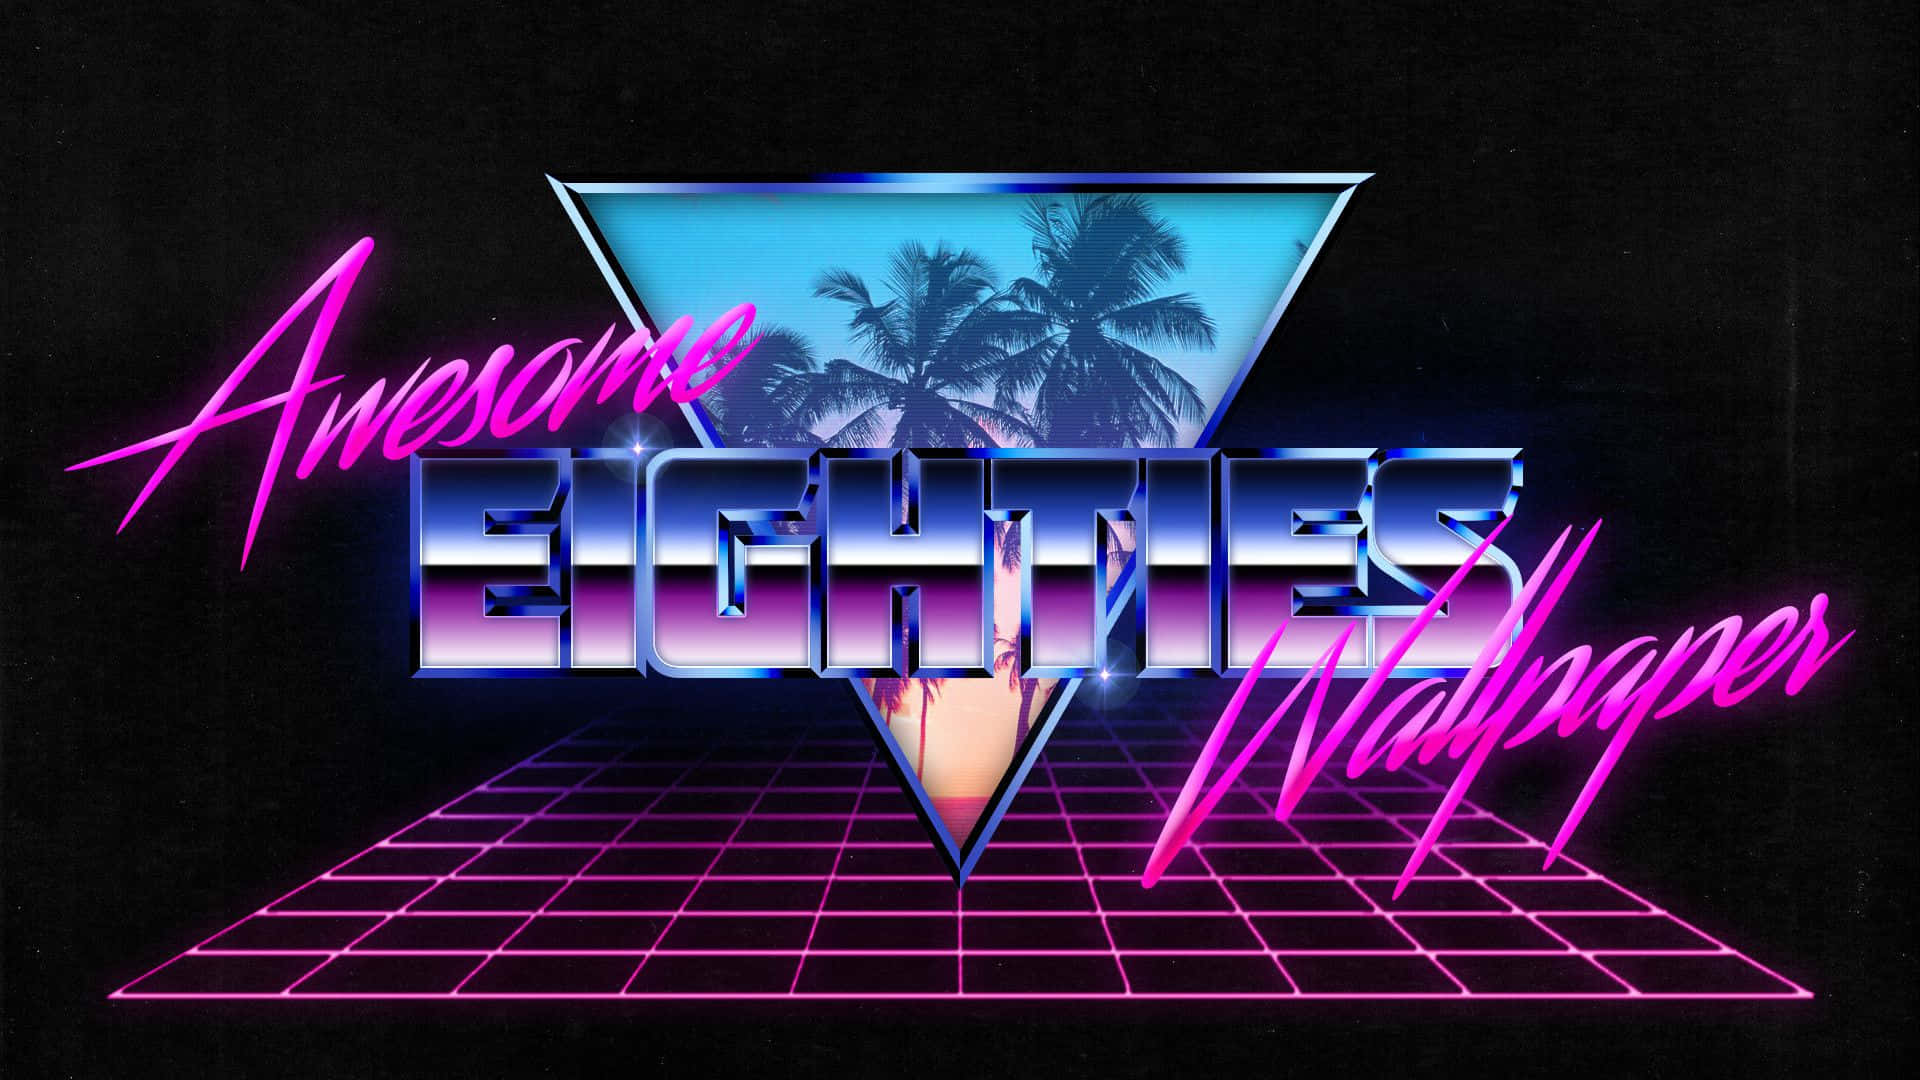 "Take A Trip To The 80s With This Neontastic Wallpaper!" Wallpaper